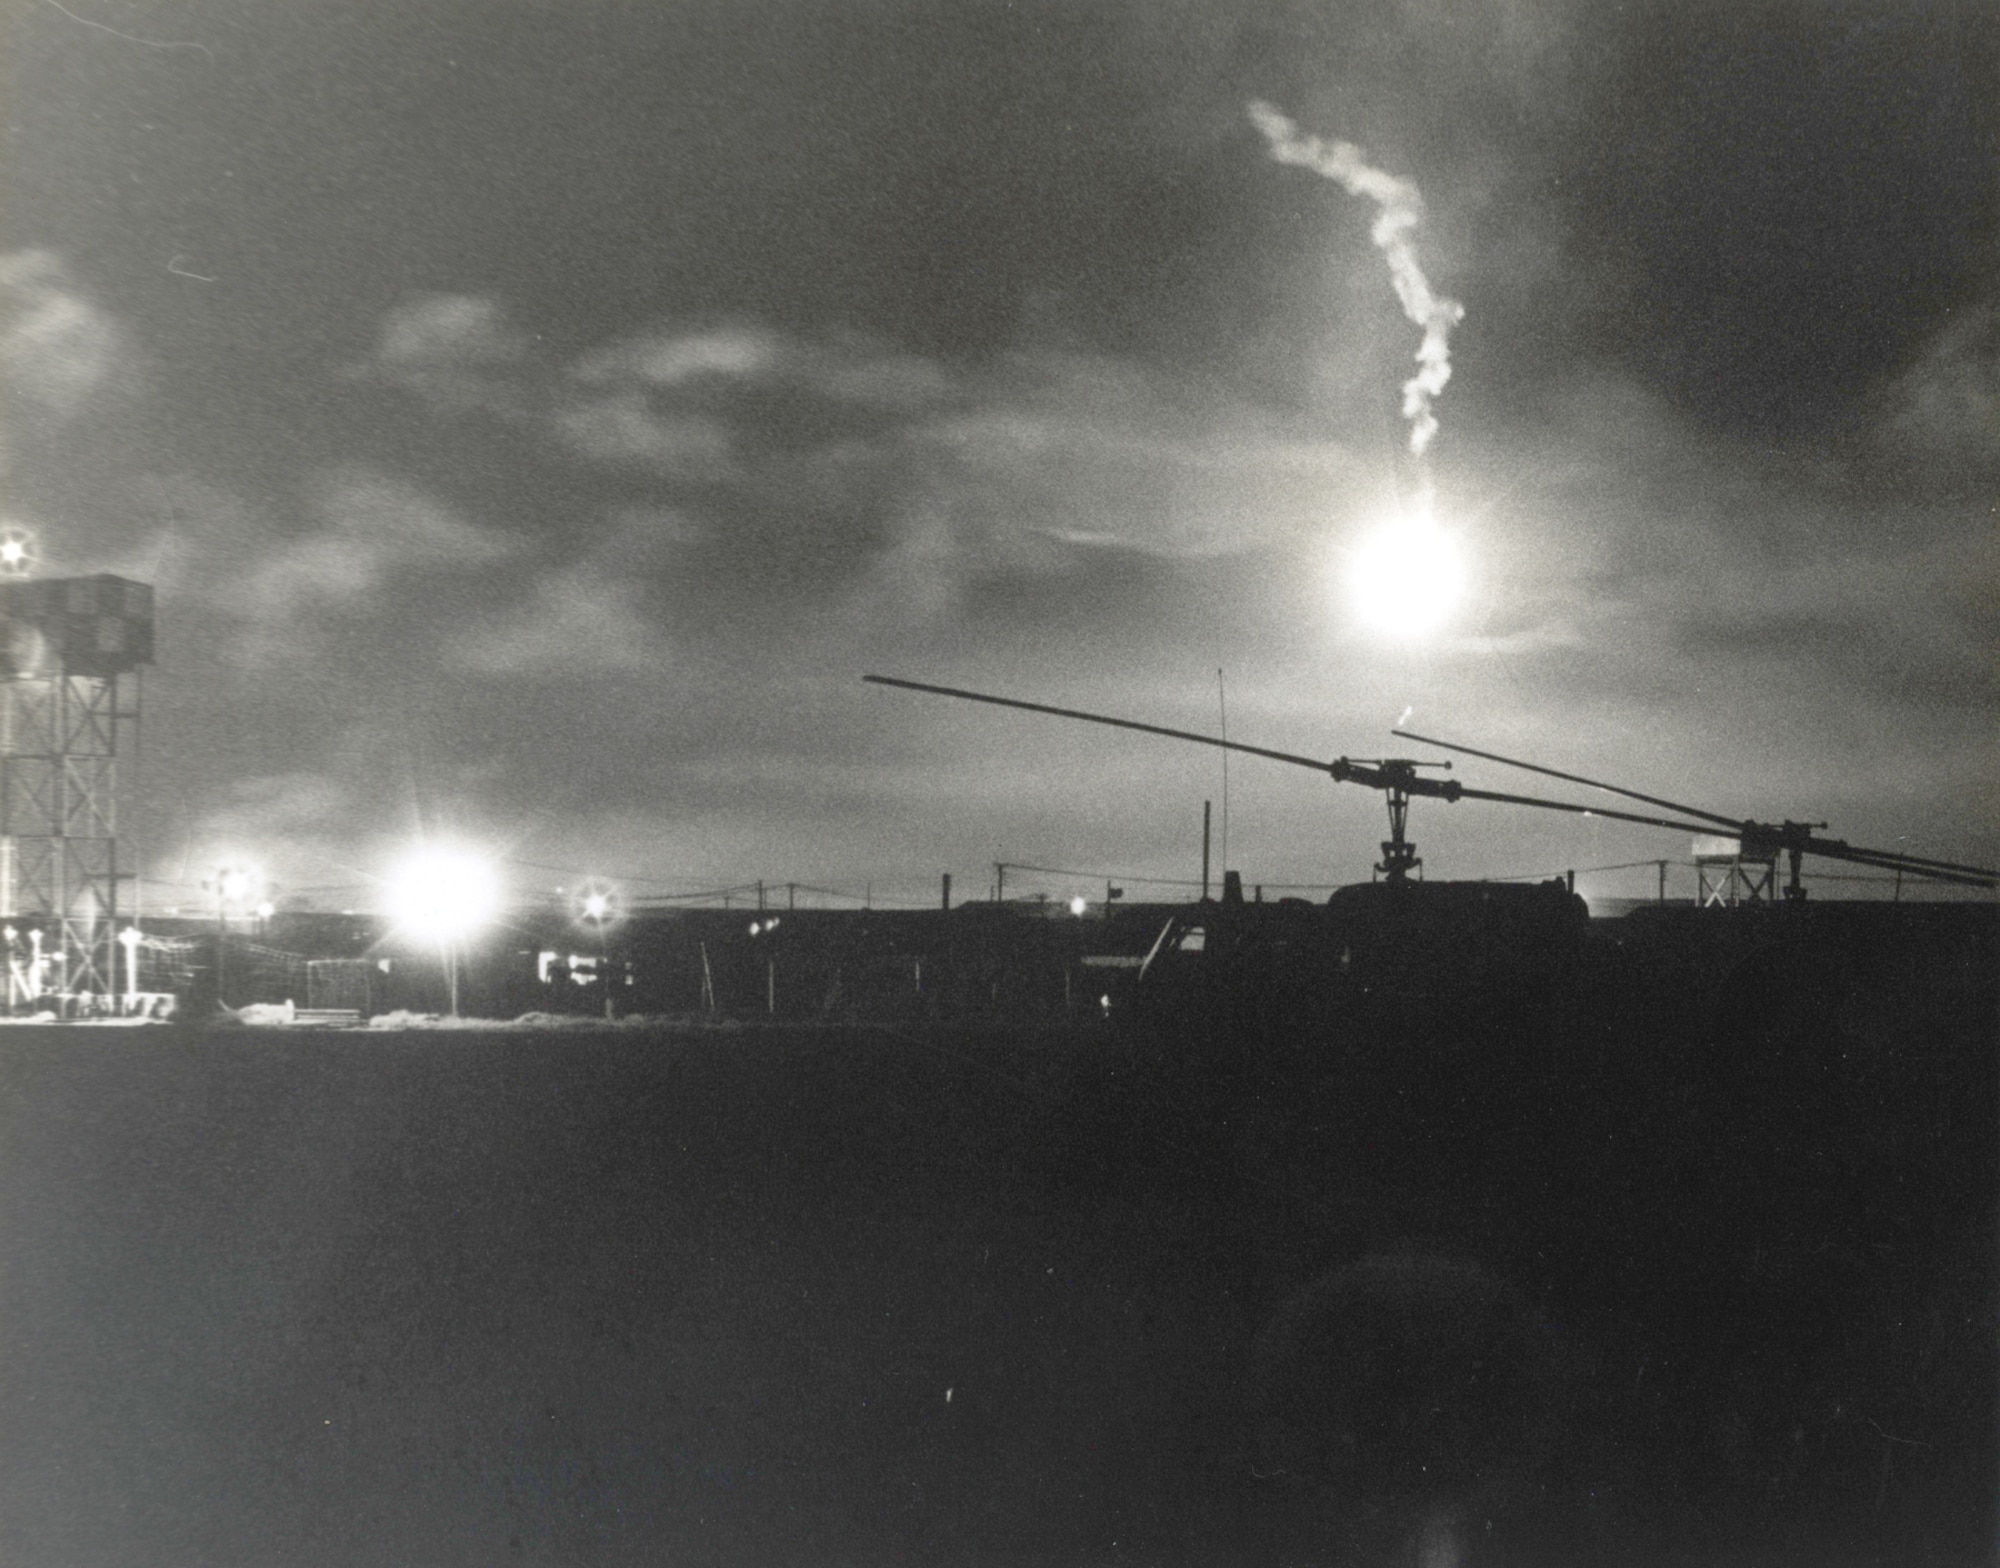 Flares light the night sky during an attack on Tan Son Nhut in December 1966. (Image courtesy of the Security Forces Museum).